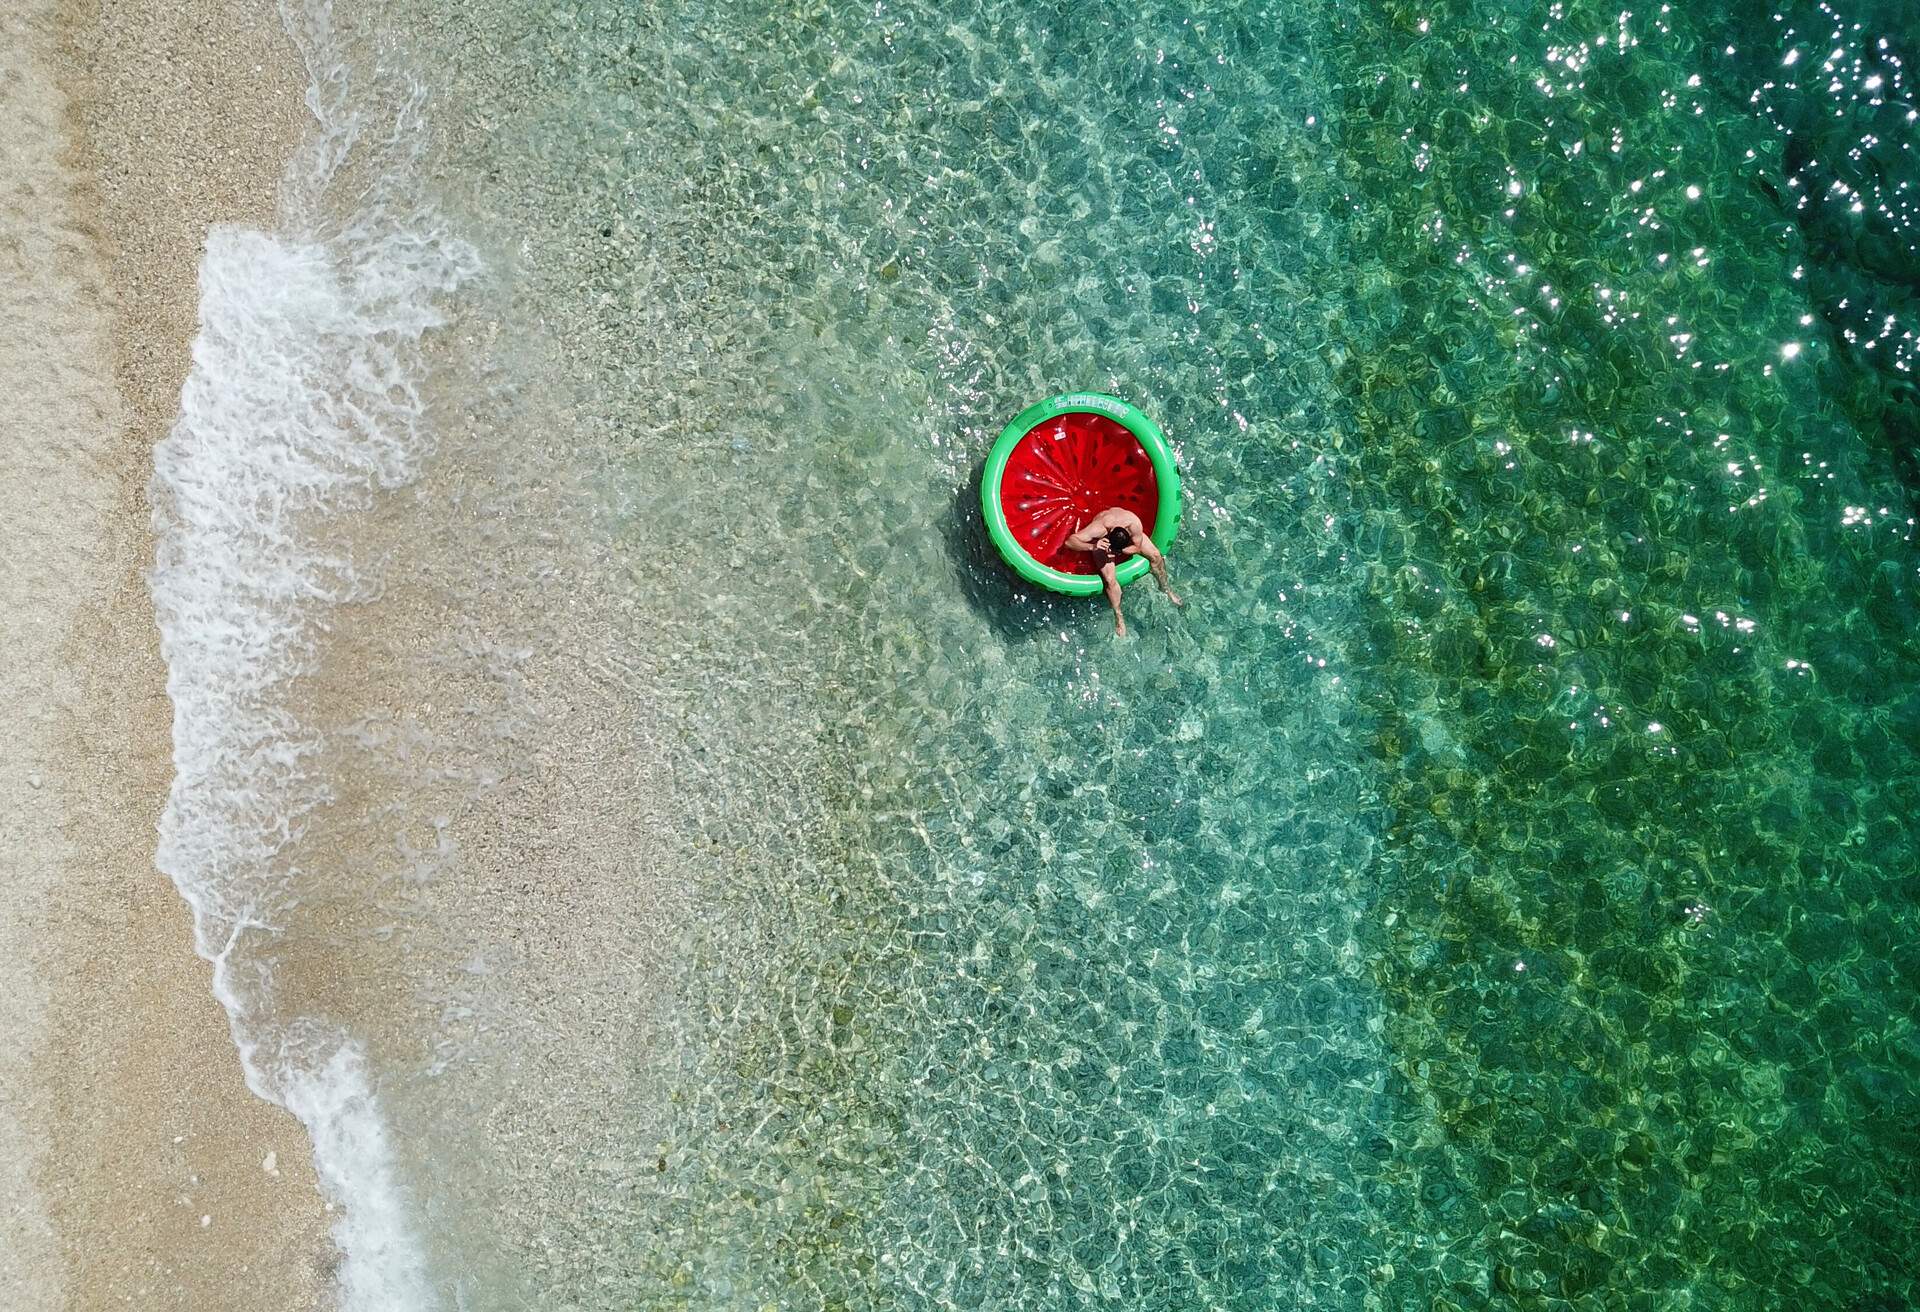 theme_people_drone_watermelon-float_shutterstock_1179329026_universal_within-usage-period_80678.jpg